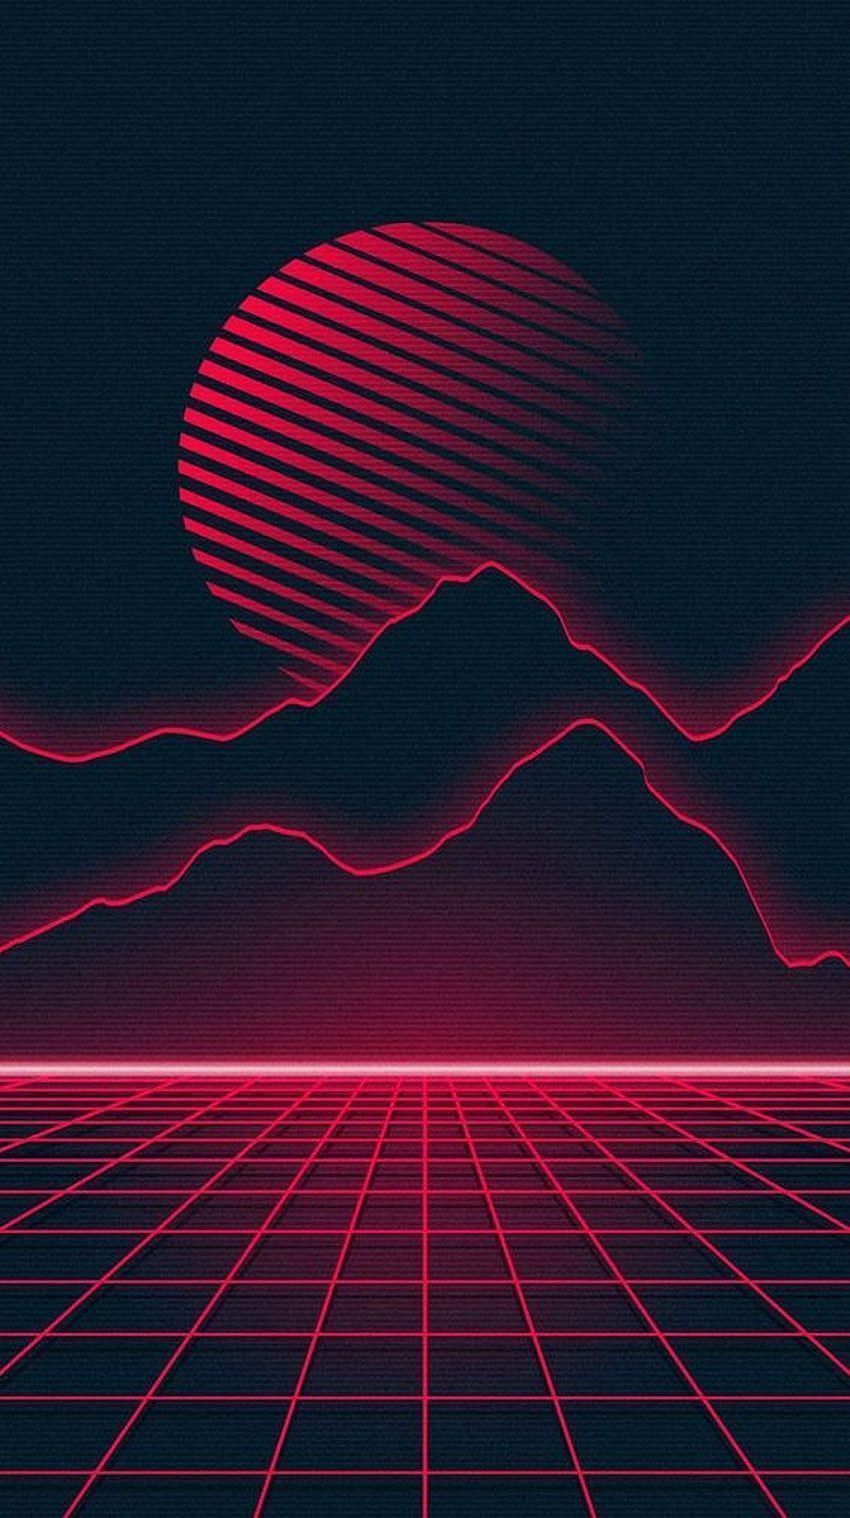 The image of a retro neon mountain landscape - Synthwave